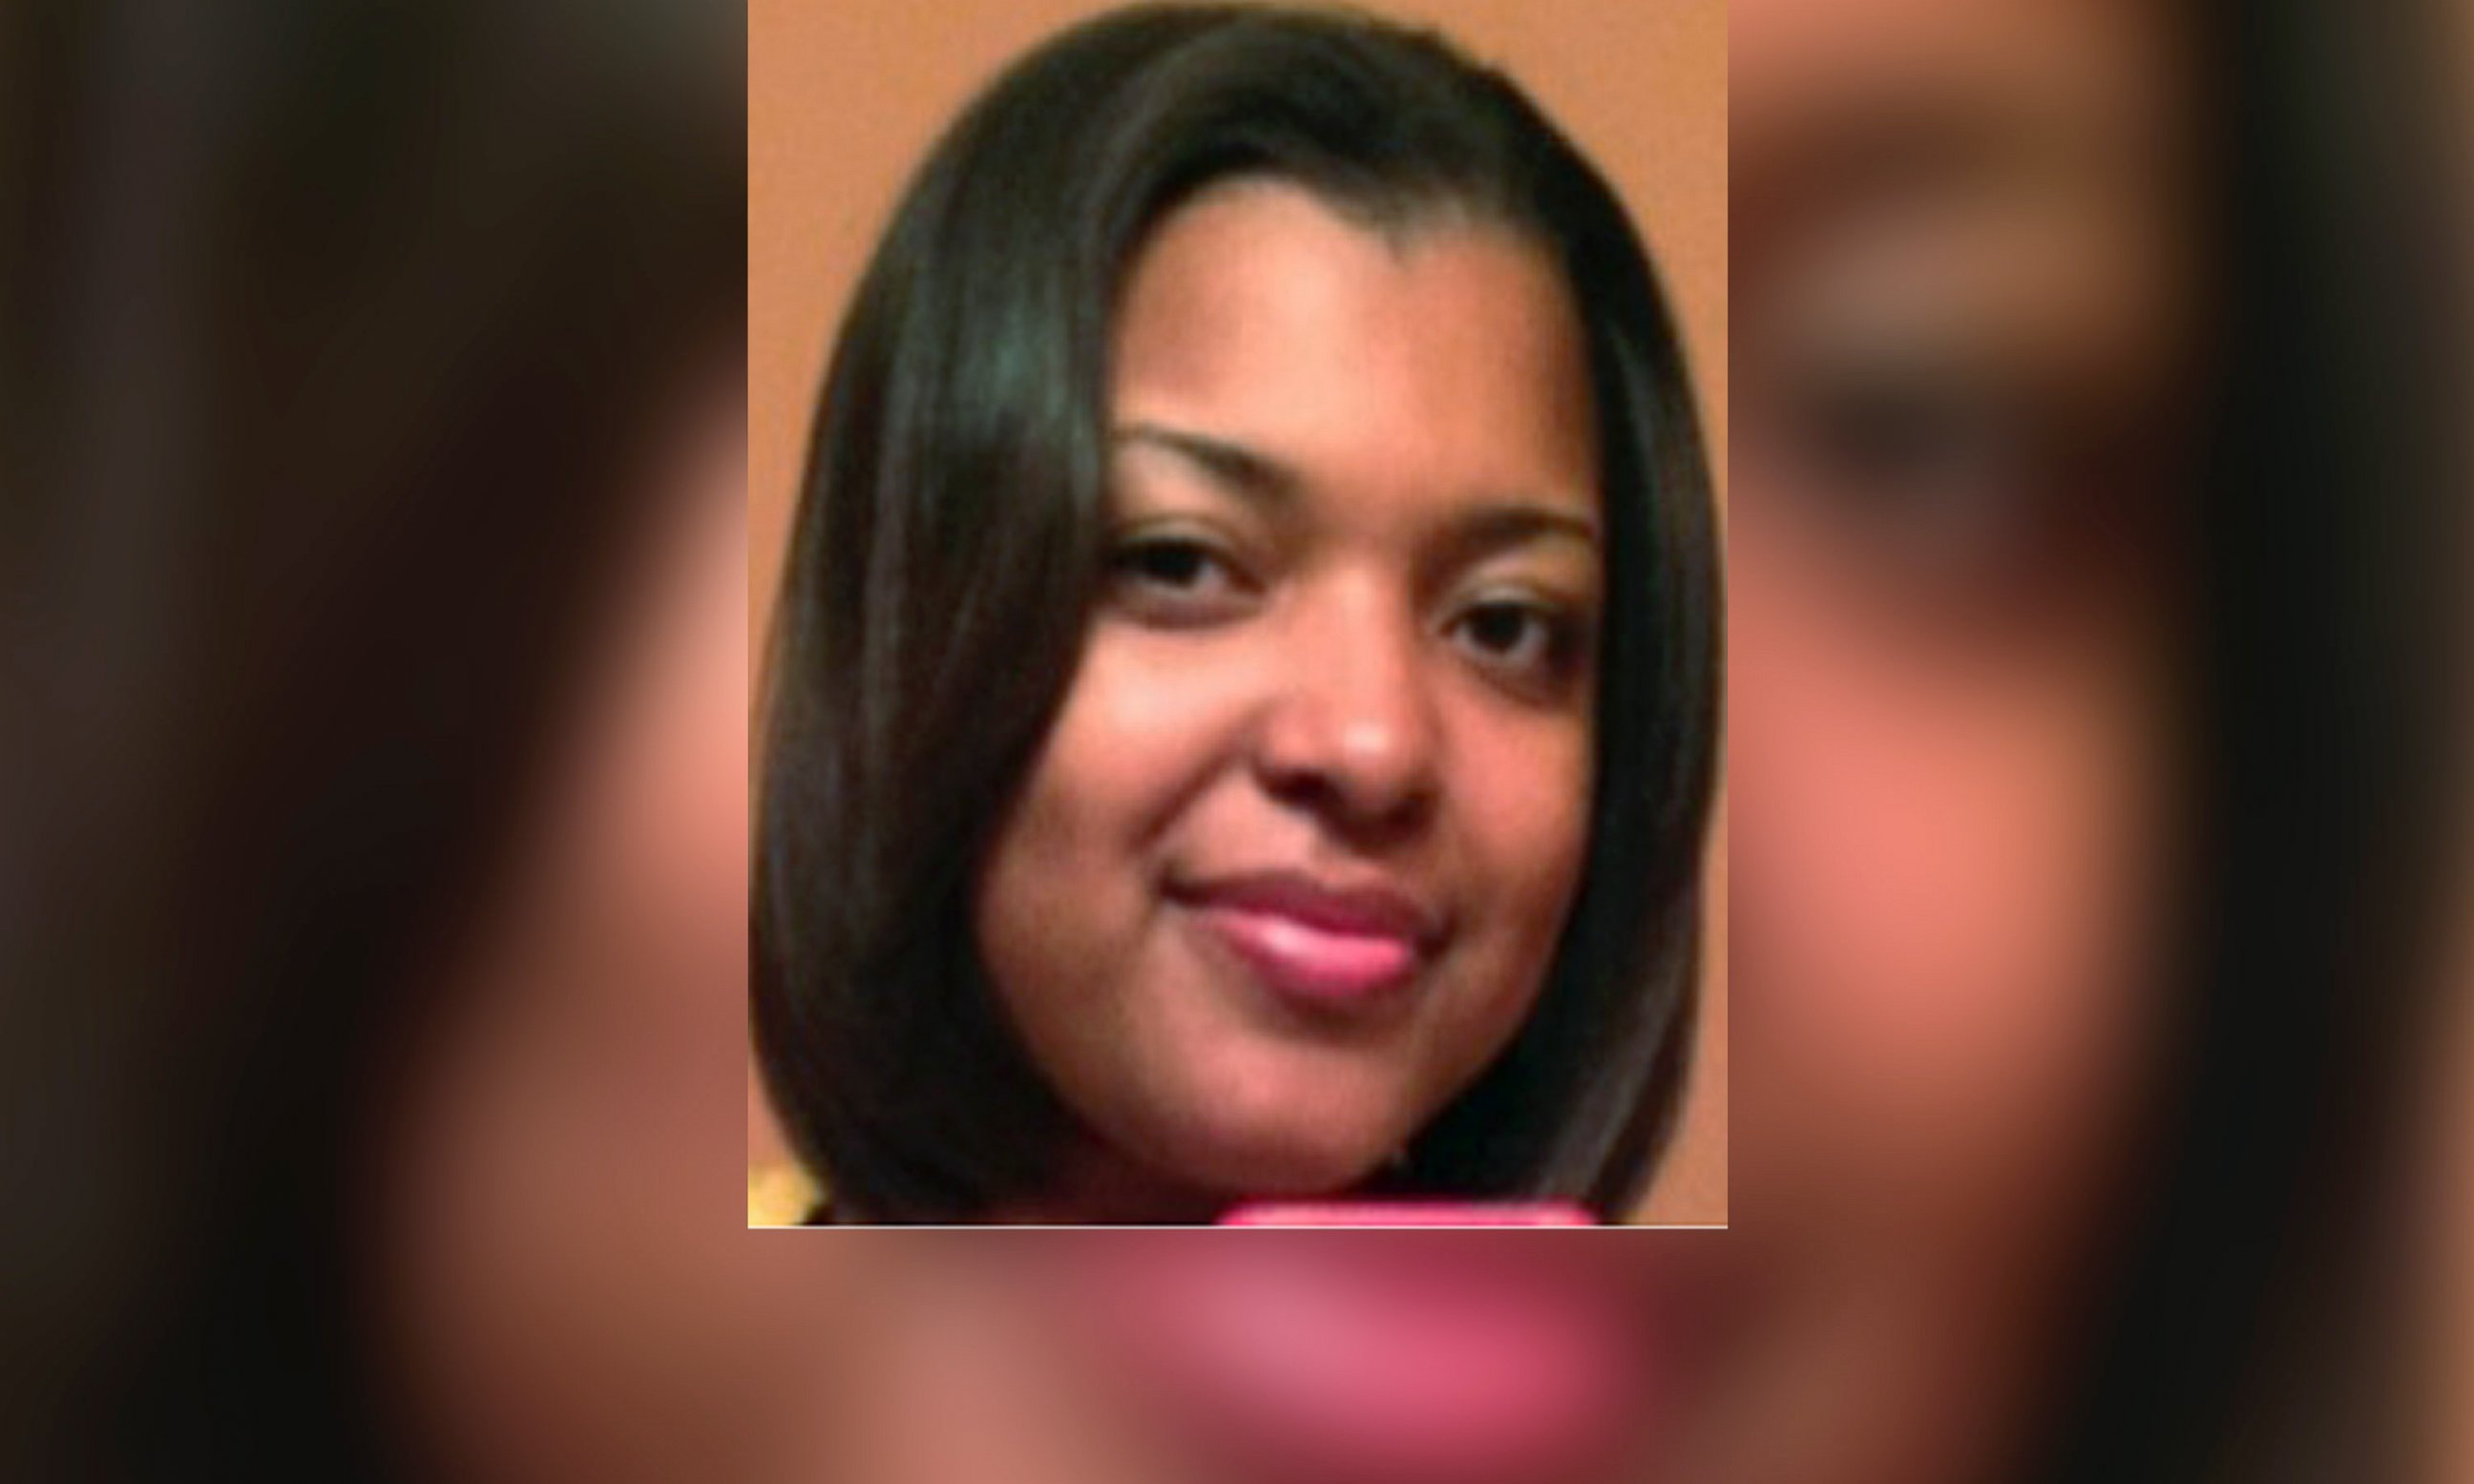 PHOTO: Amber Vinson, a nurse seen here in an undated family photo, contracted Ebola after caring for Thomas Eric Duncan at Dallas' Texas Health Presbyterian Hospital.